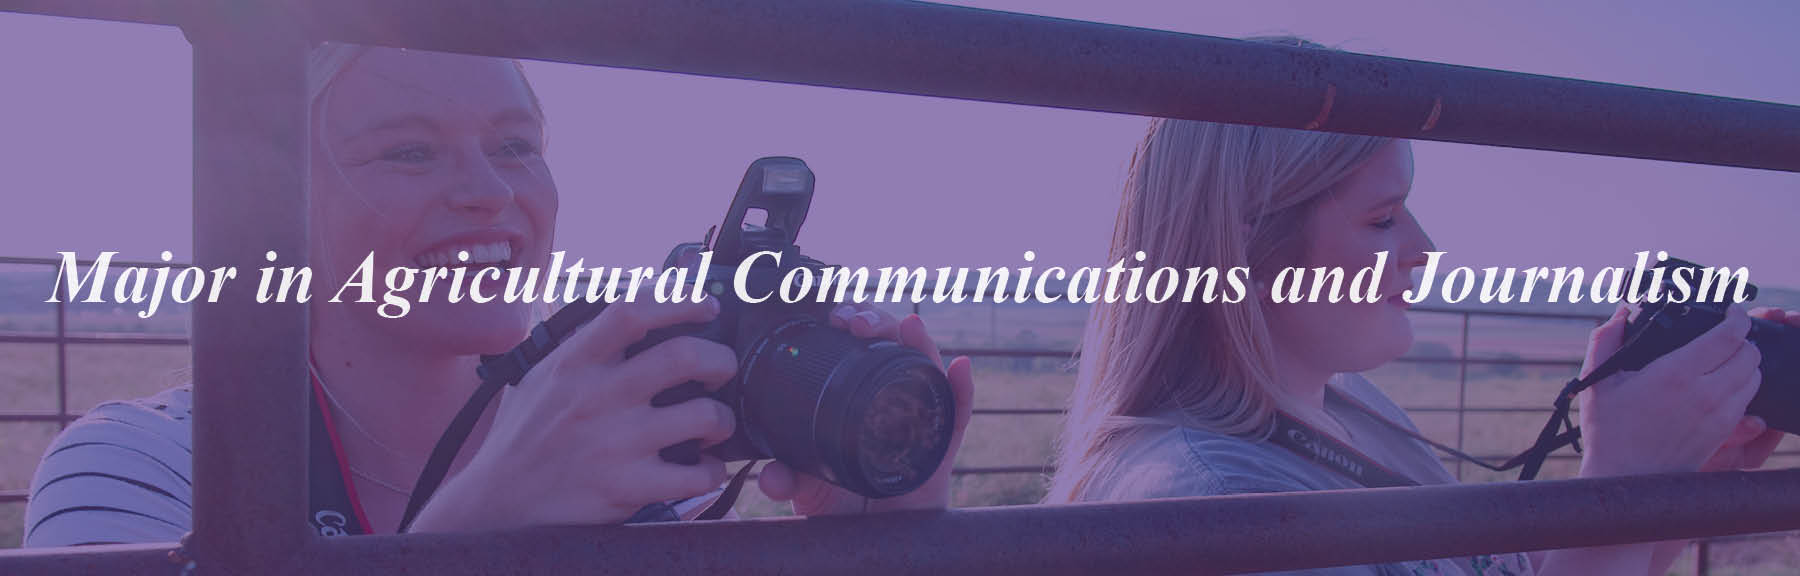 Consider majoring in Agricultural Communications and Journalism